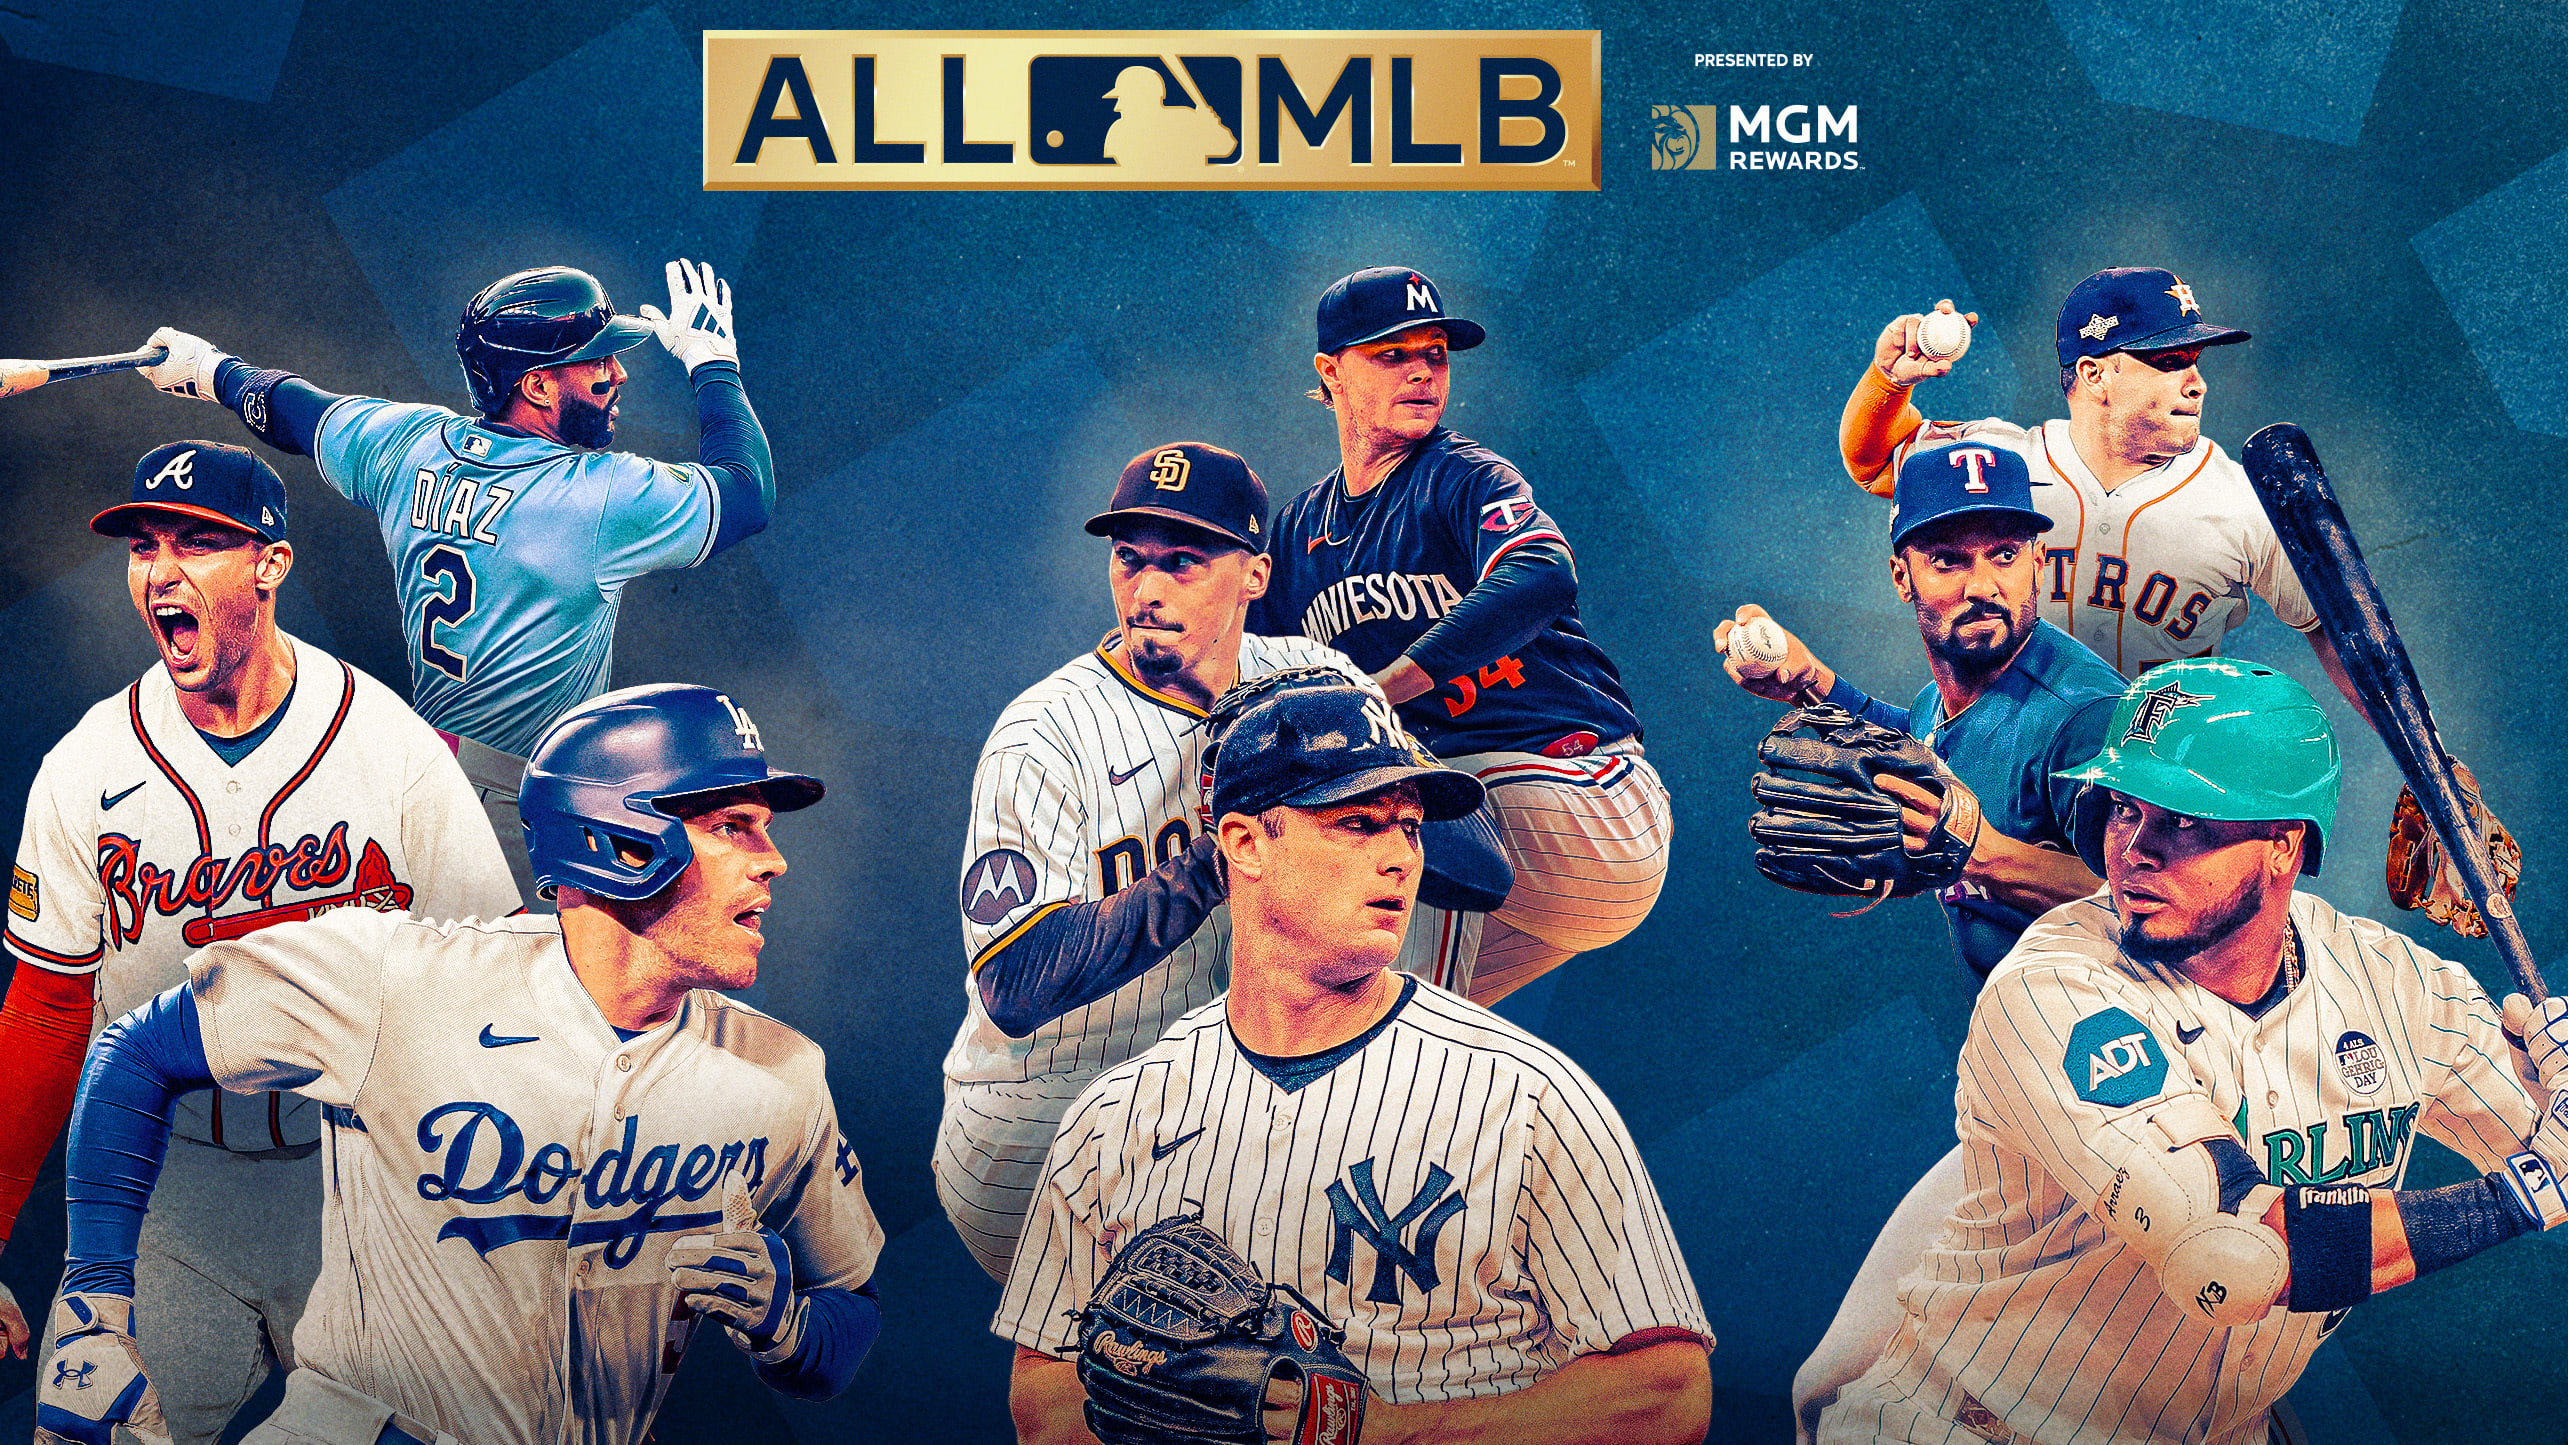 A photo illustration with 9 players on the All-MLB ballot